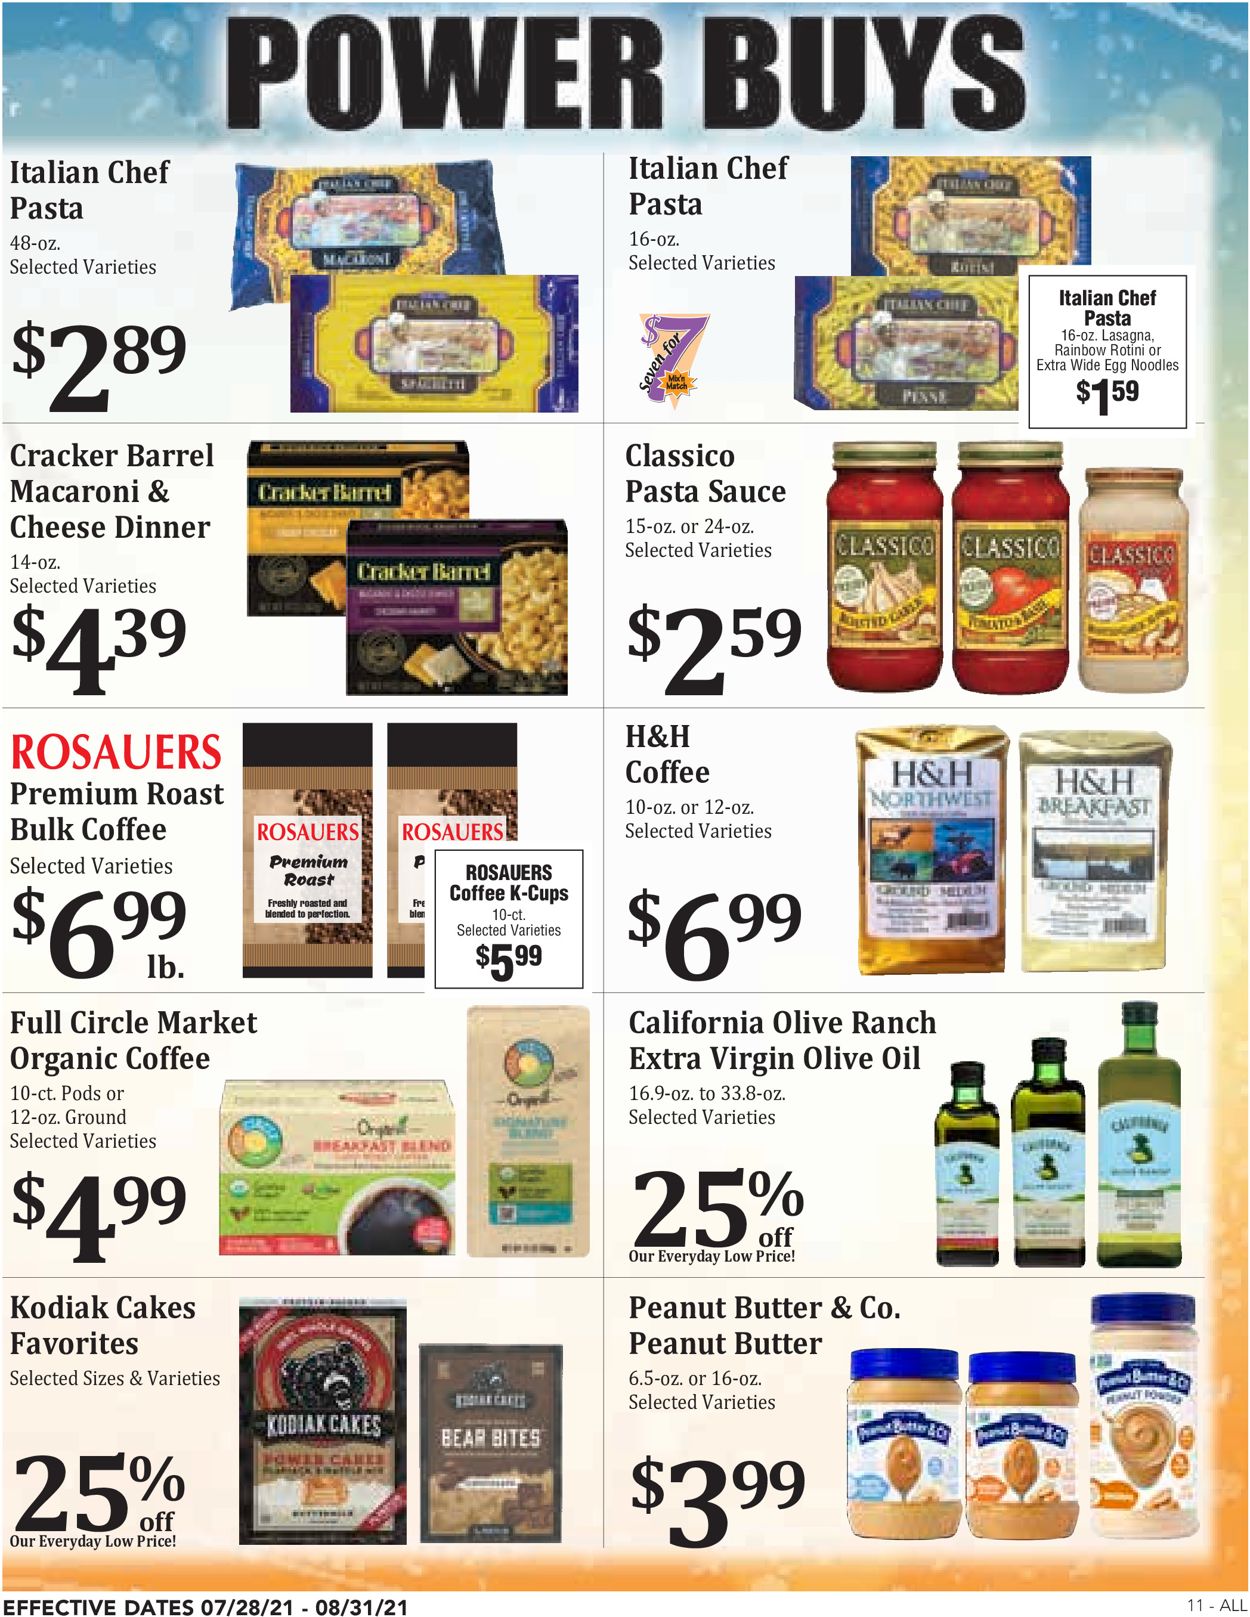 Rosauers Ad from 07/28/2021